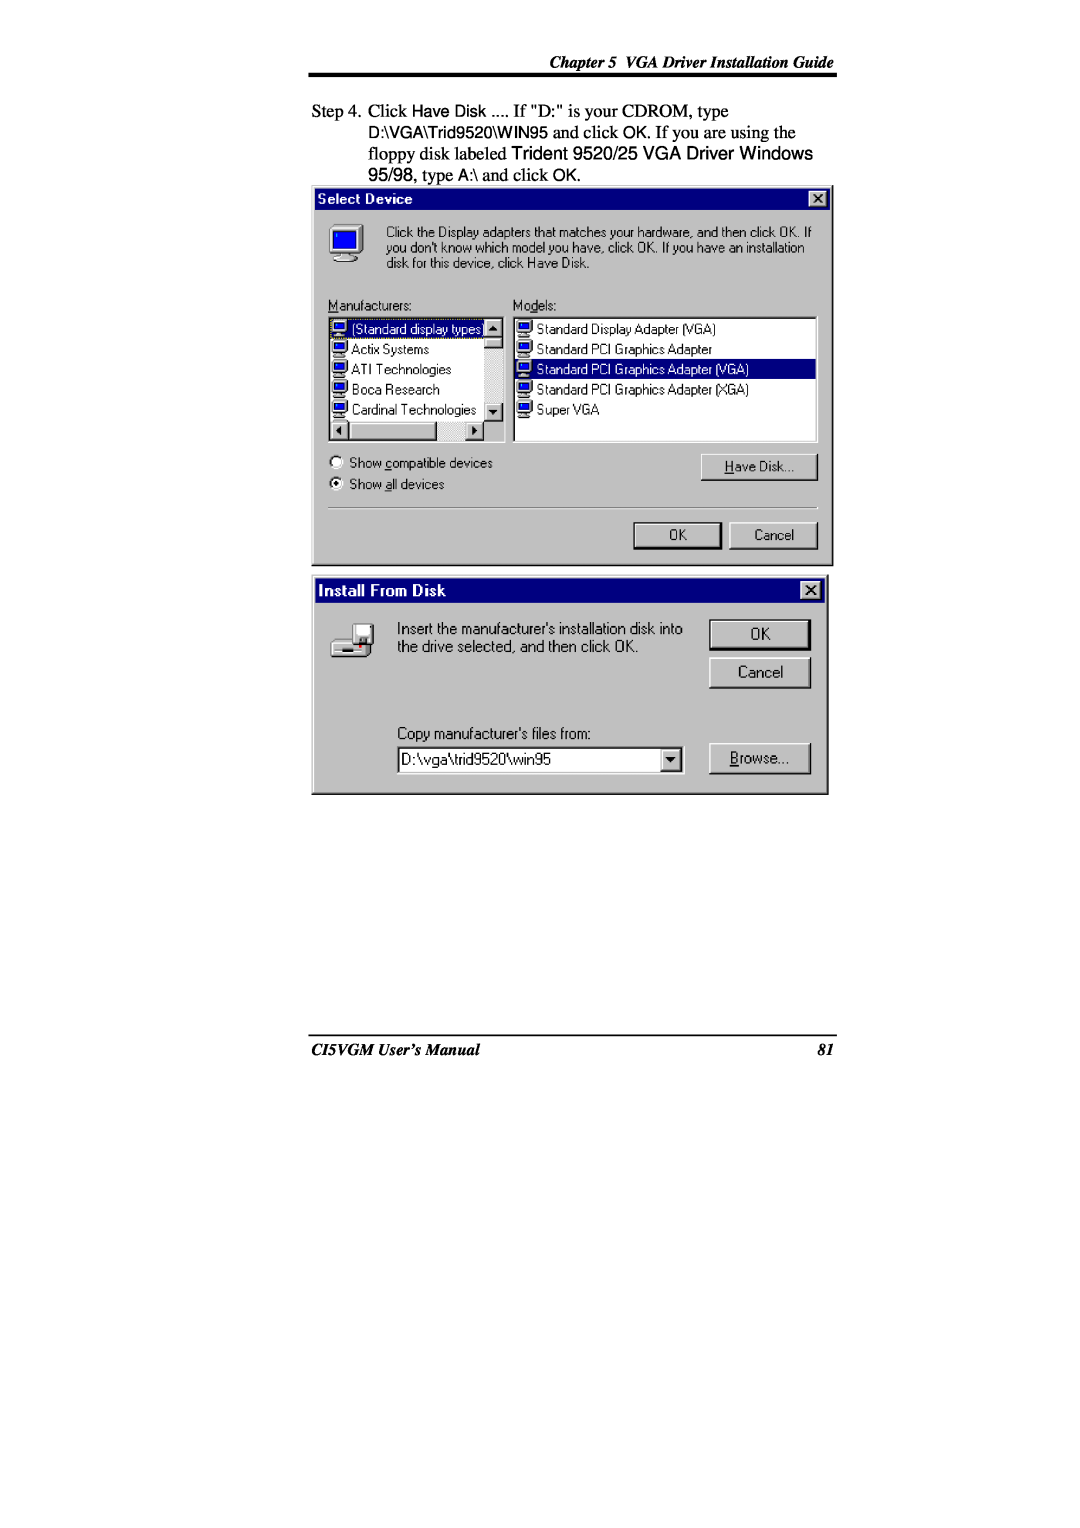 IBM CI5VGM Series Click Have Disk .... If D is your CDROM, type D\VGA\Trid9520\WIN95 and click OK. If you are using the 